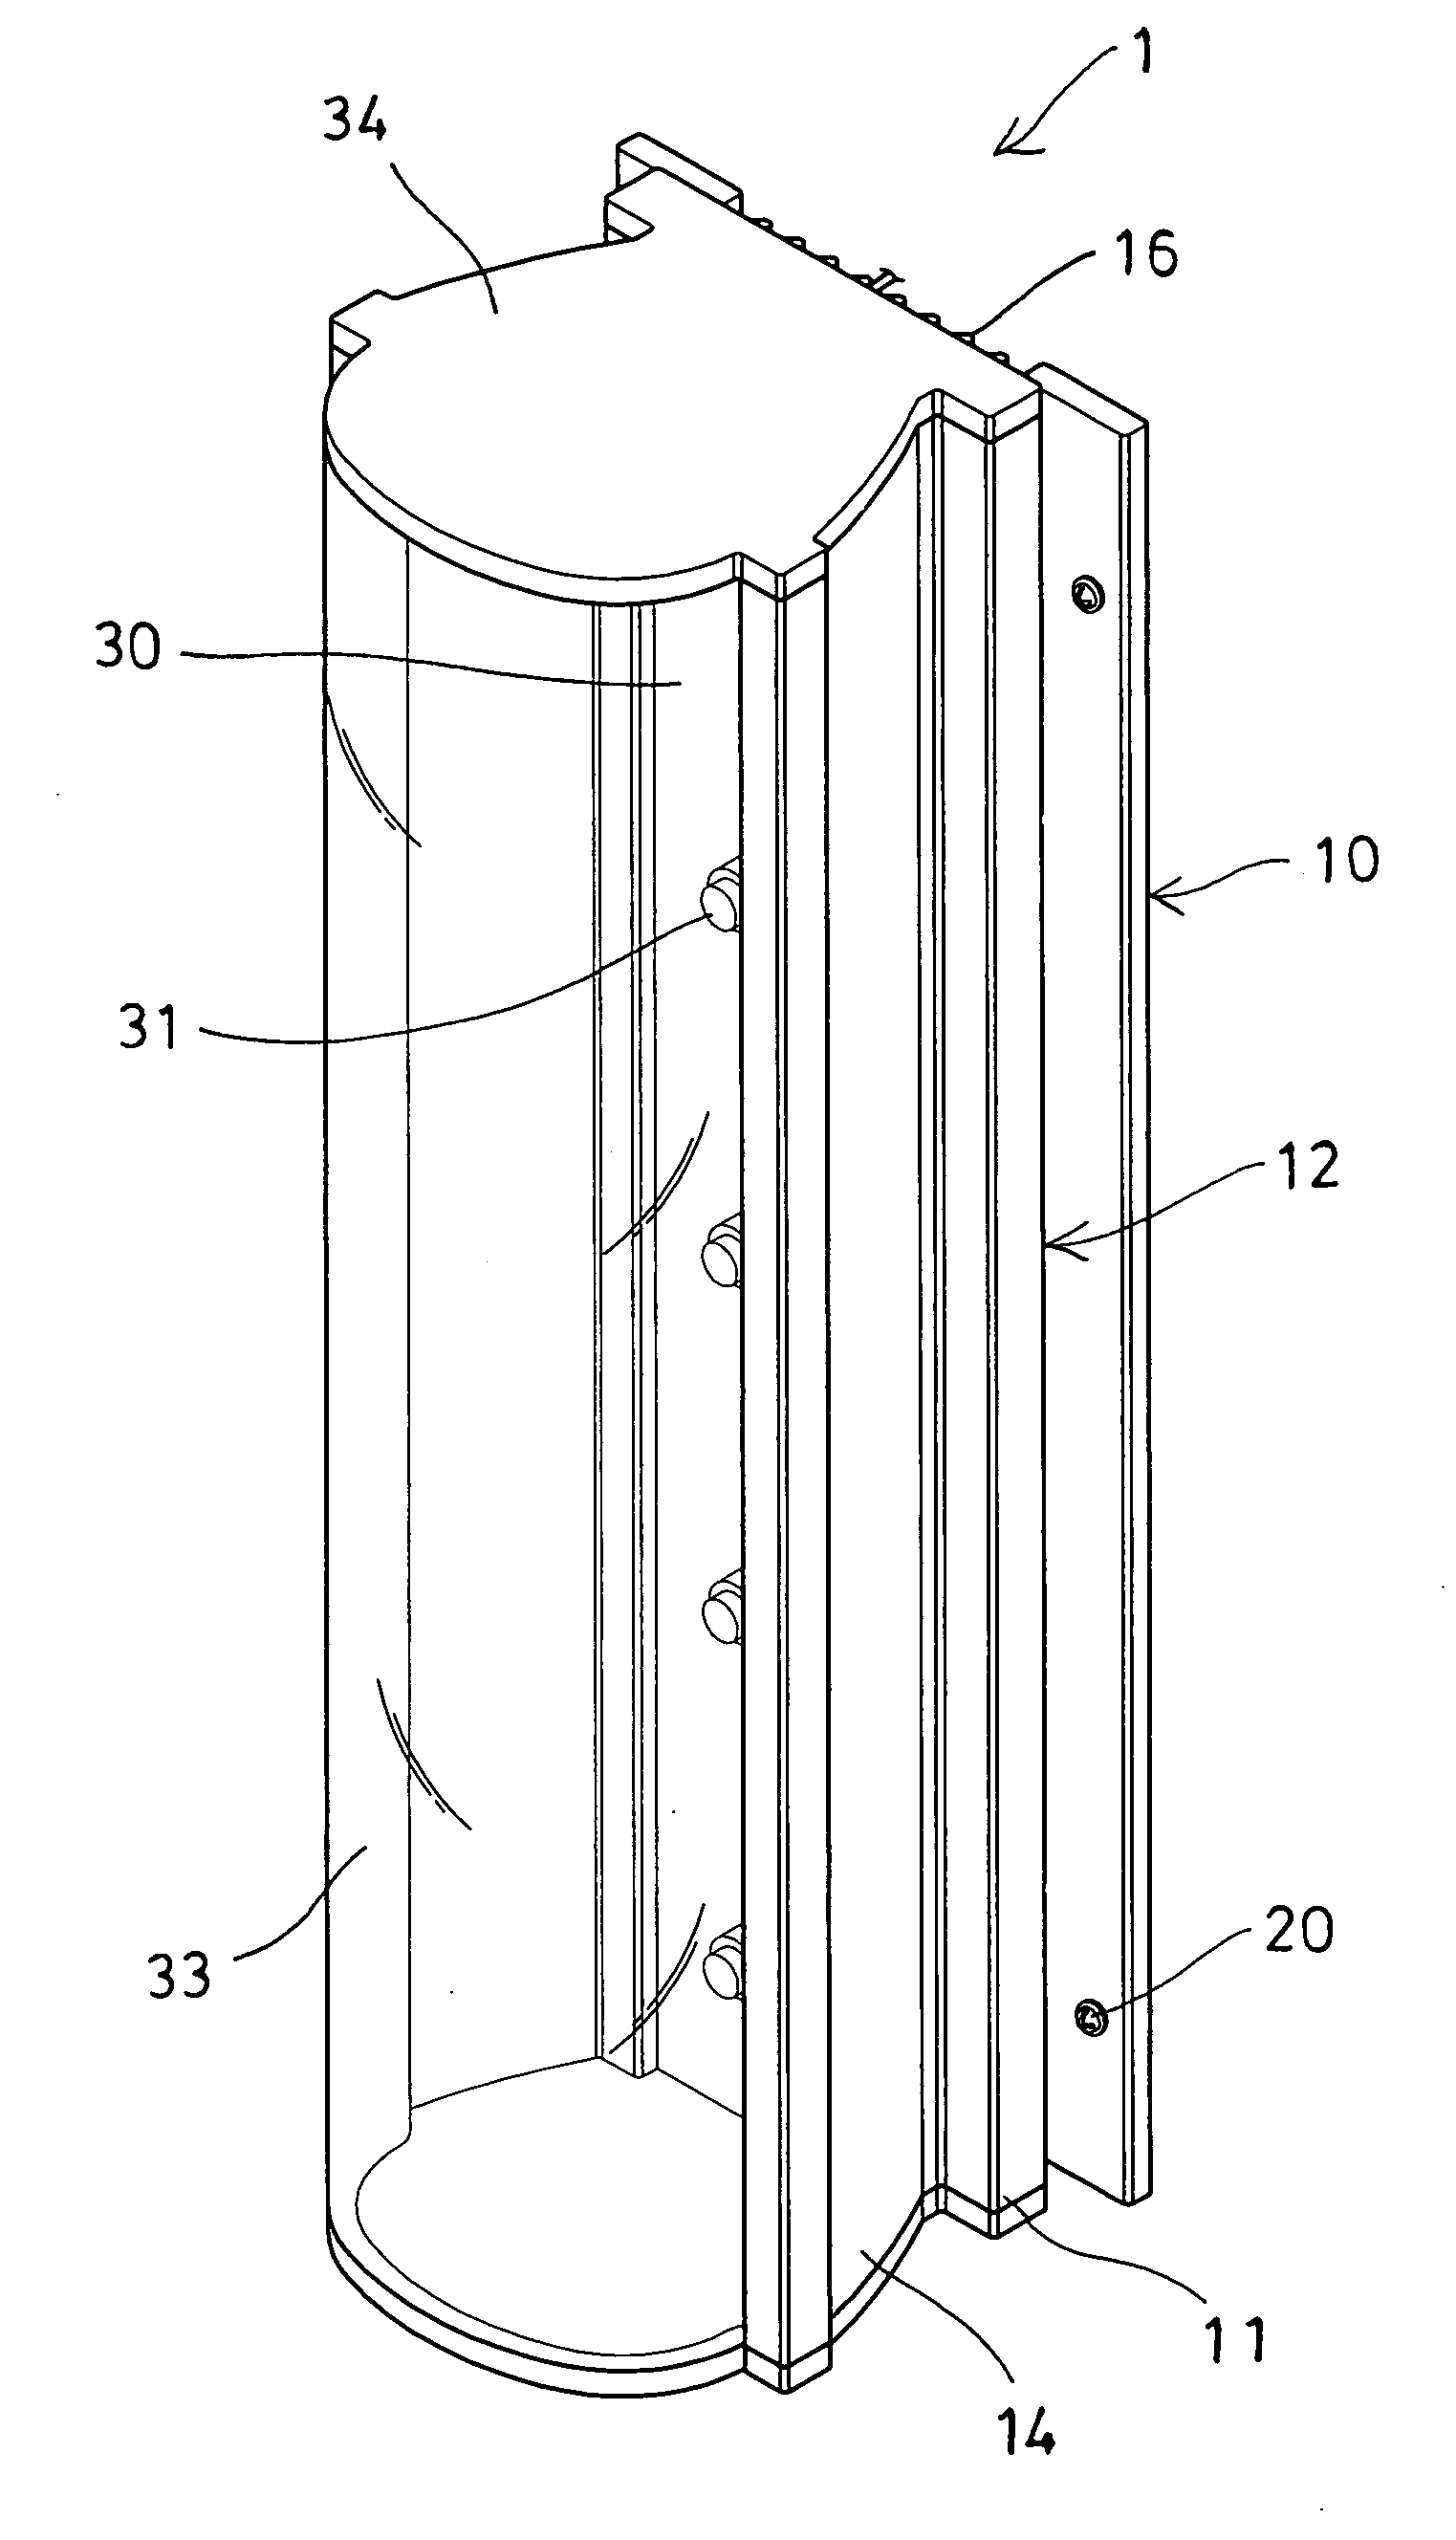 LED light device having heat dissipating structure